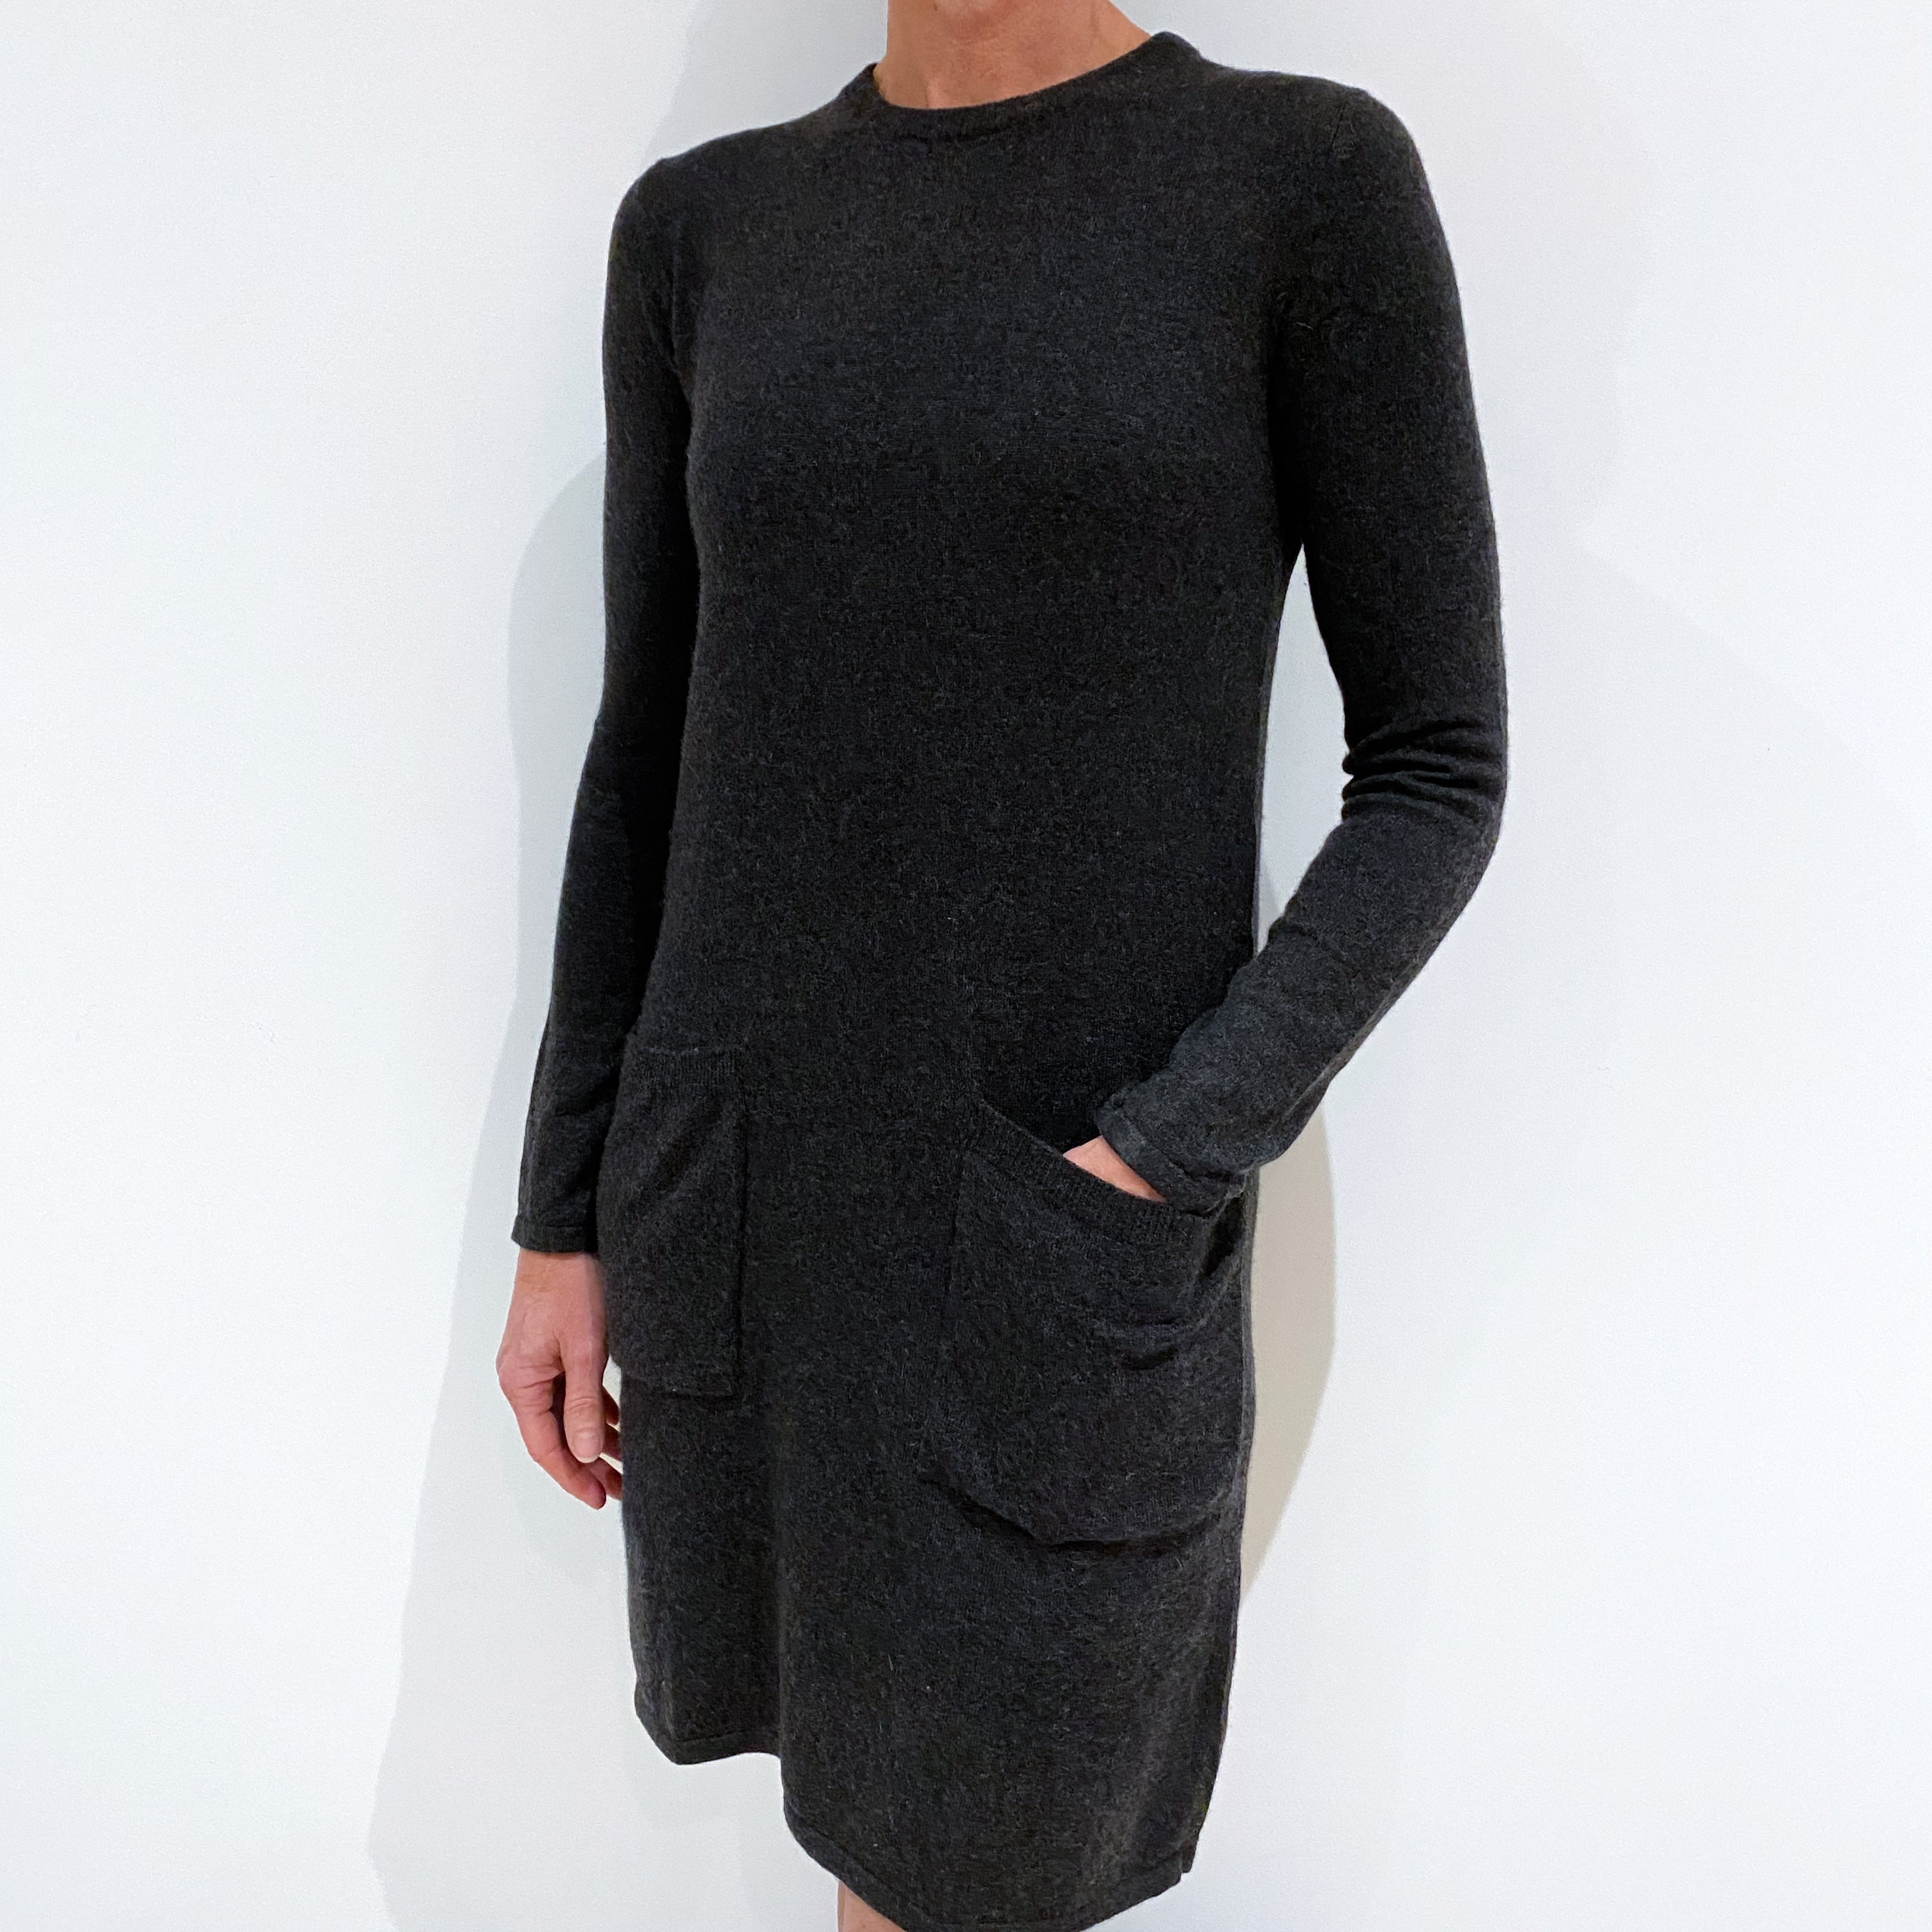 Charcoal Grey Cashmere Crew Neck Dress with Pockets Small